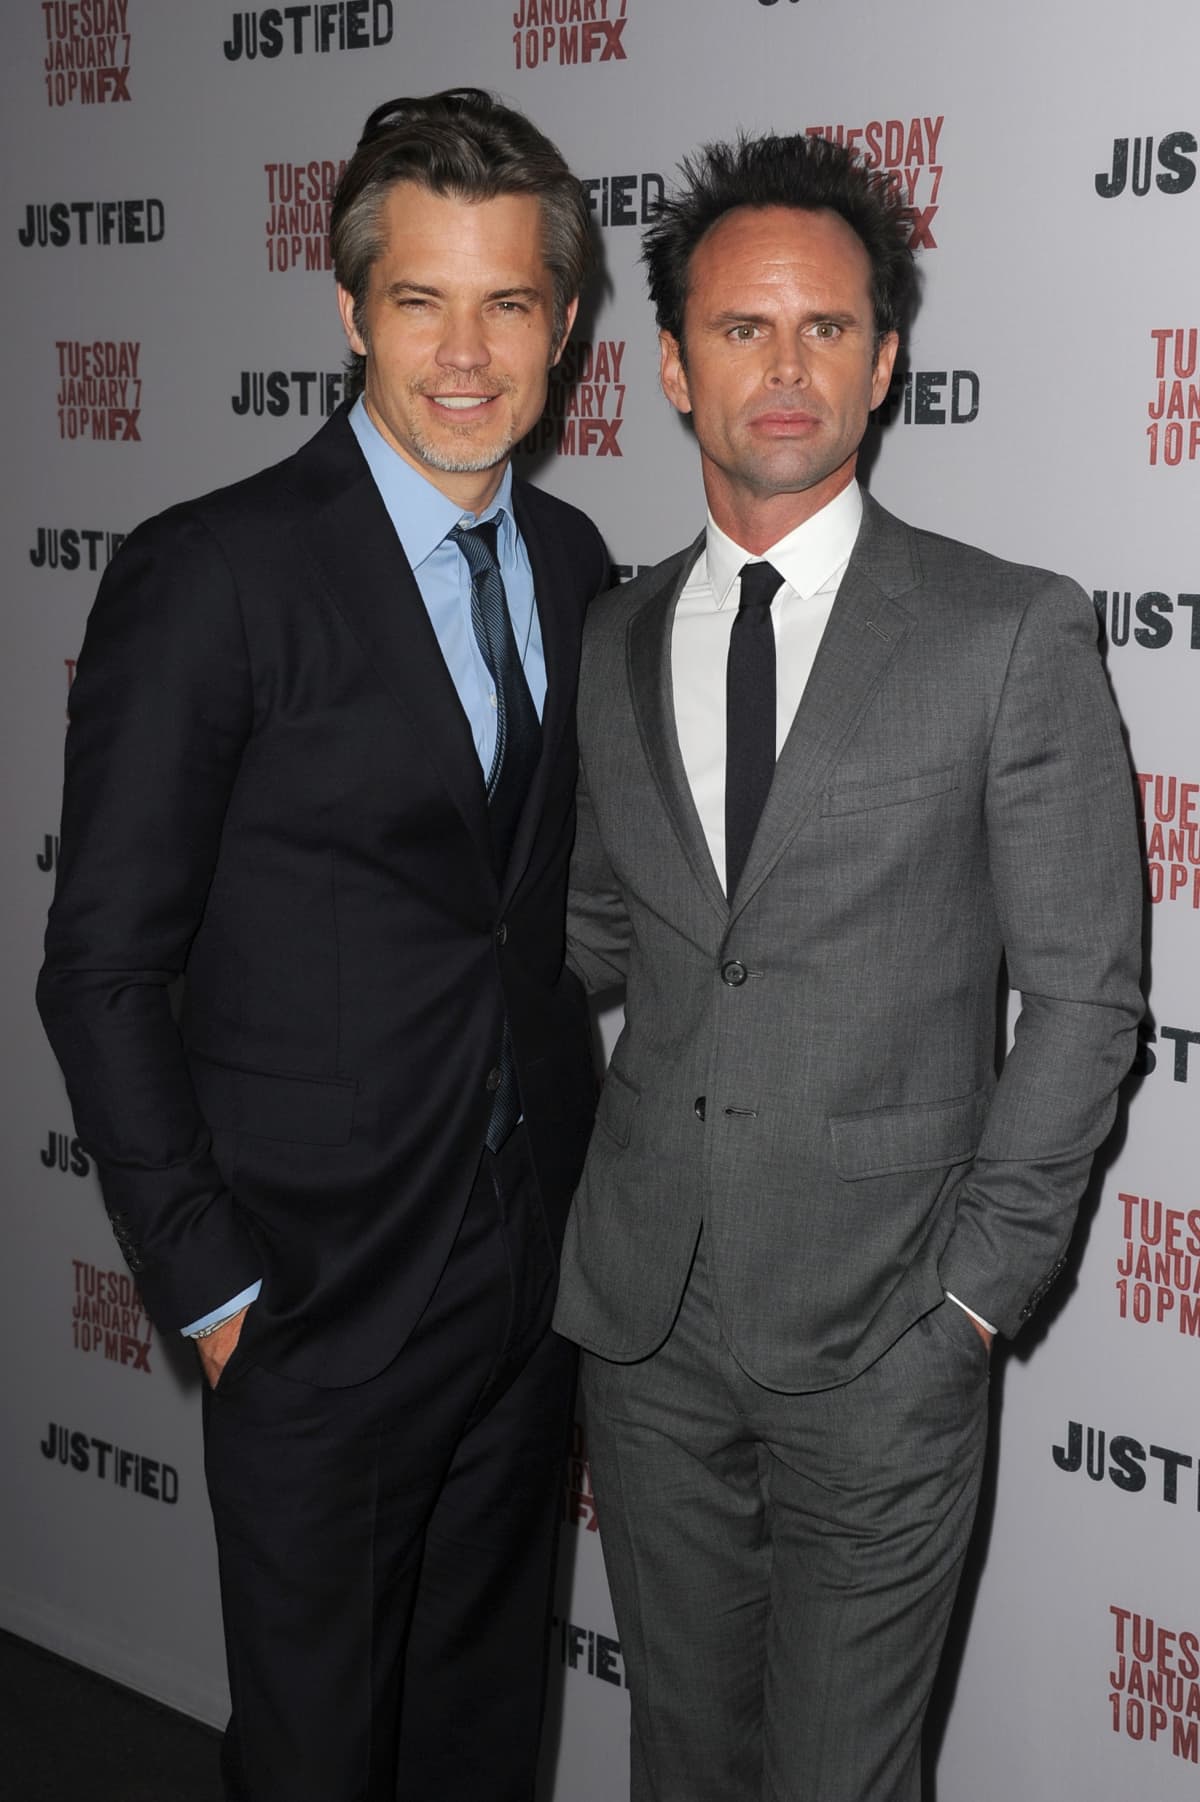 LOS ANGELES, CA - JANUARY 06:  Actors Timothy Olyphant (L) and Walton Goggins attend the season 5 premiere screening of FX's "Justified" at the DGA Theater on January 6, 2014 in Los Angeles, California.  (Photo by Kevin Winter/Getty Images)